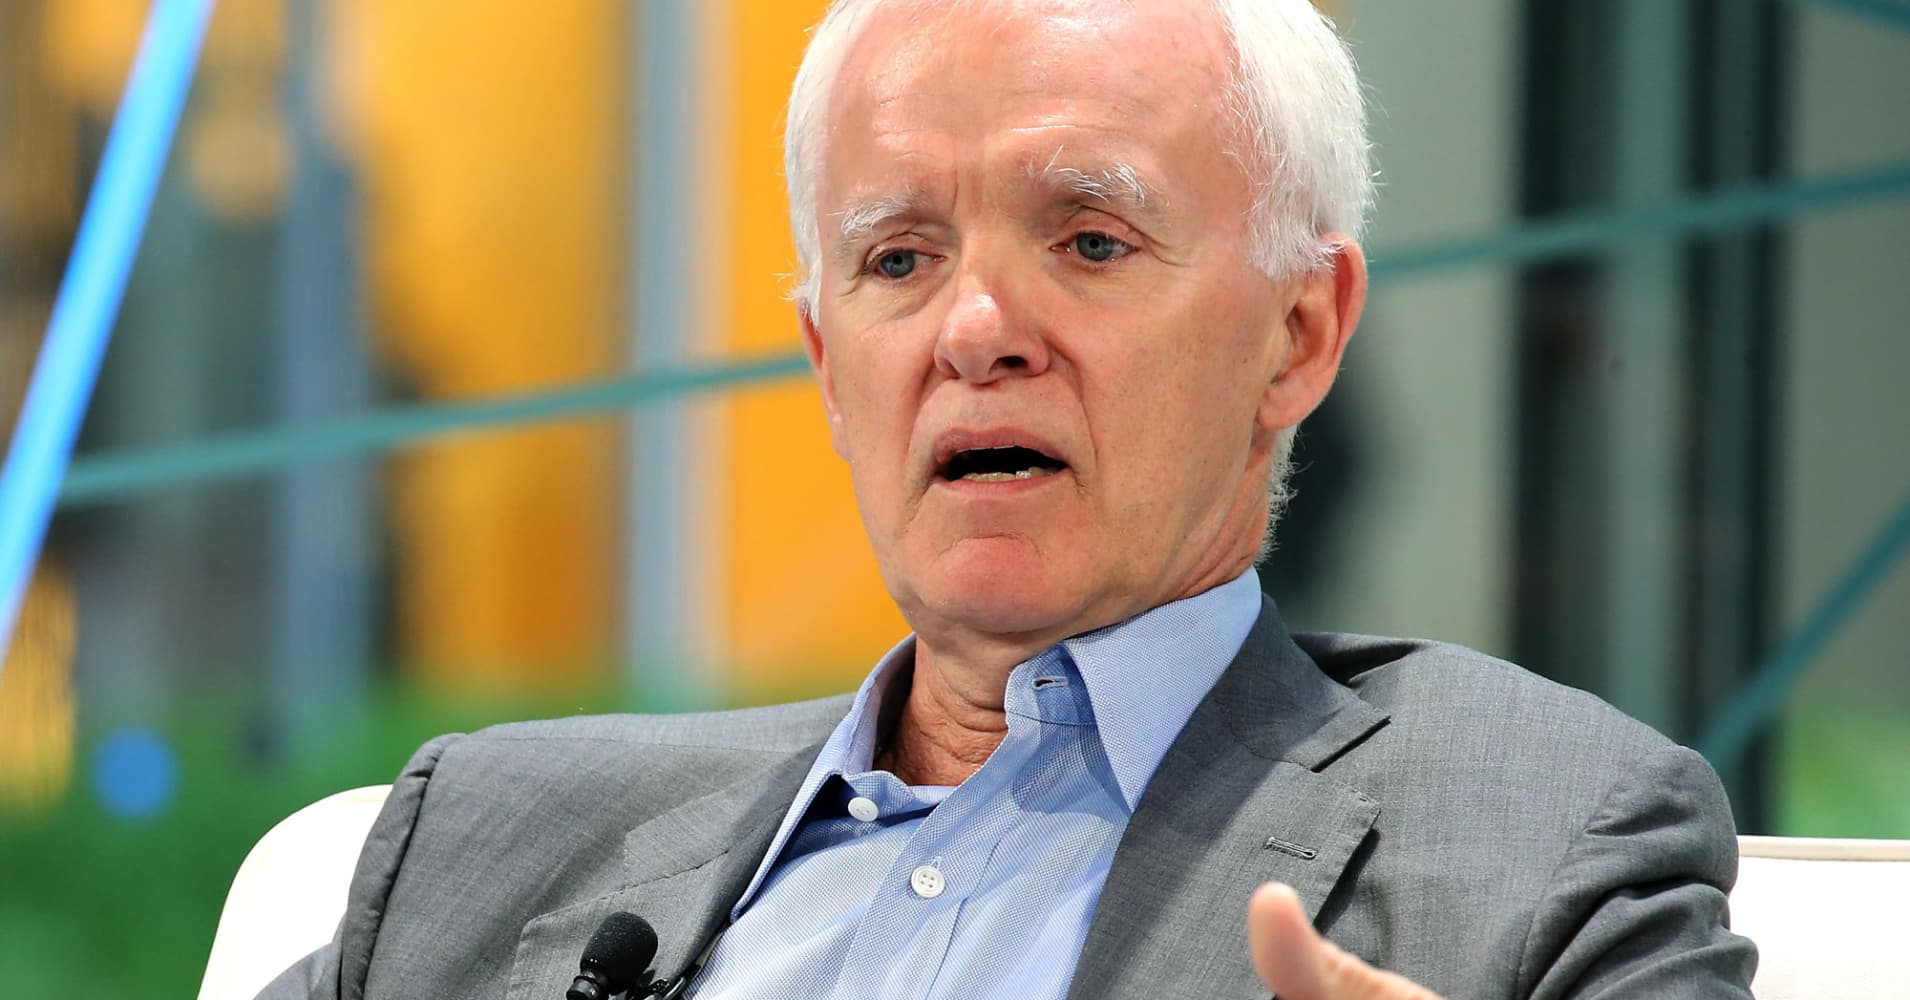 We're robbing from the future to pay for the past, former Sen. Bob Kerrey says